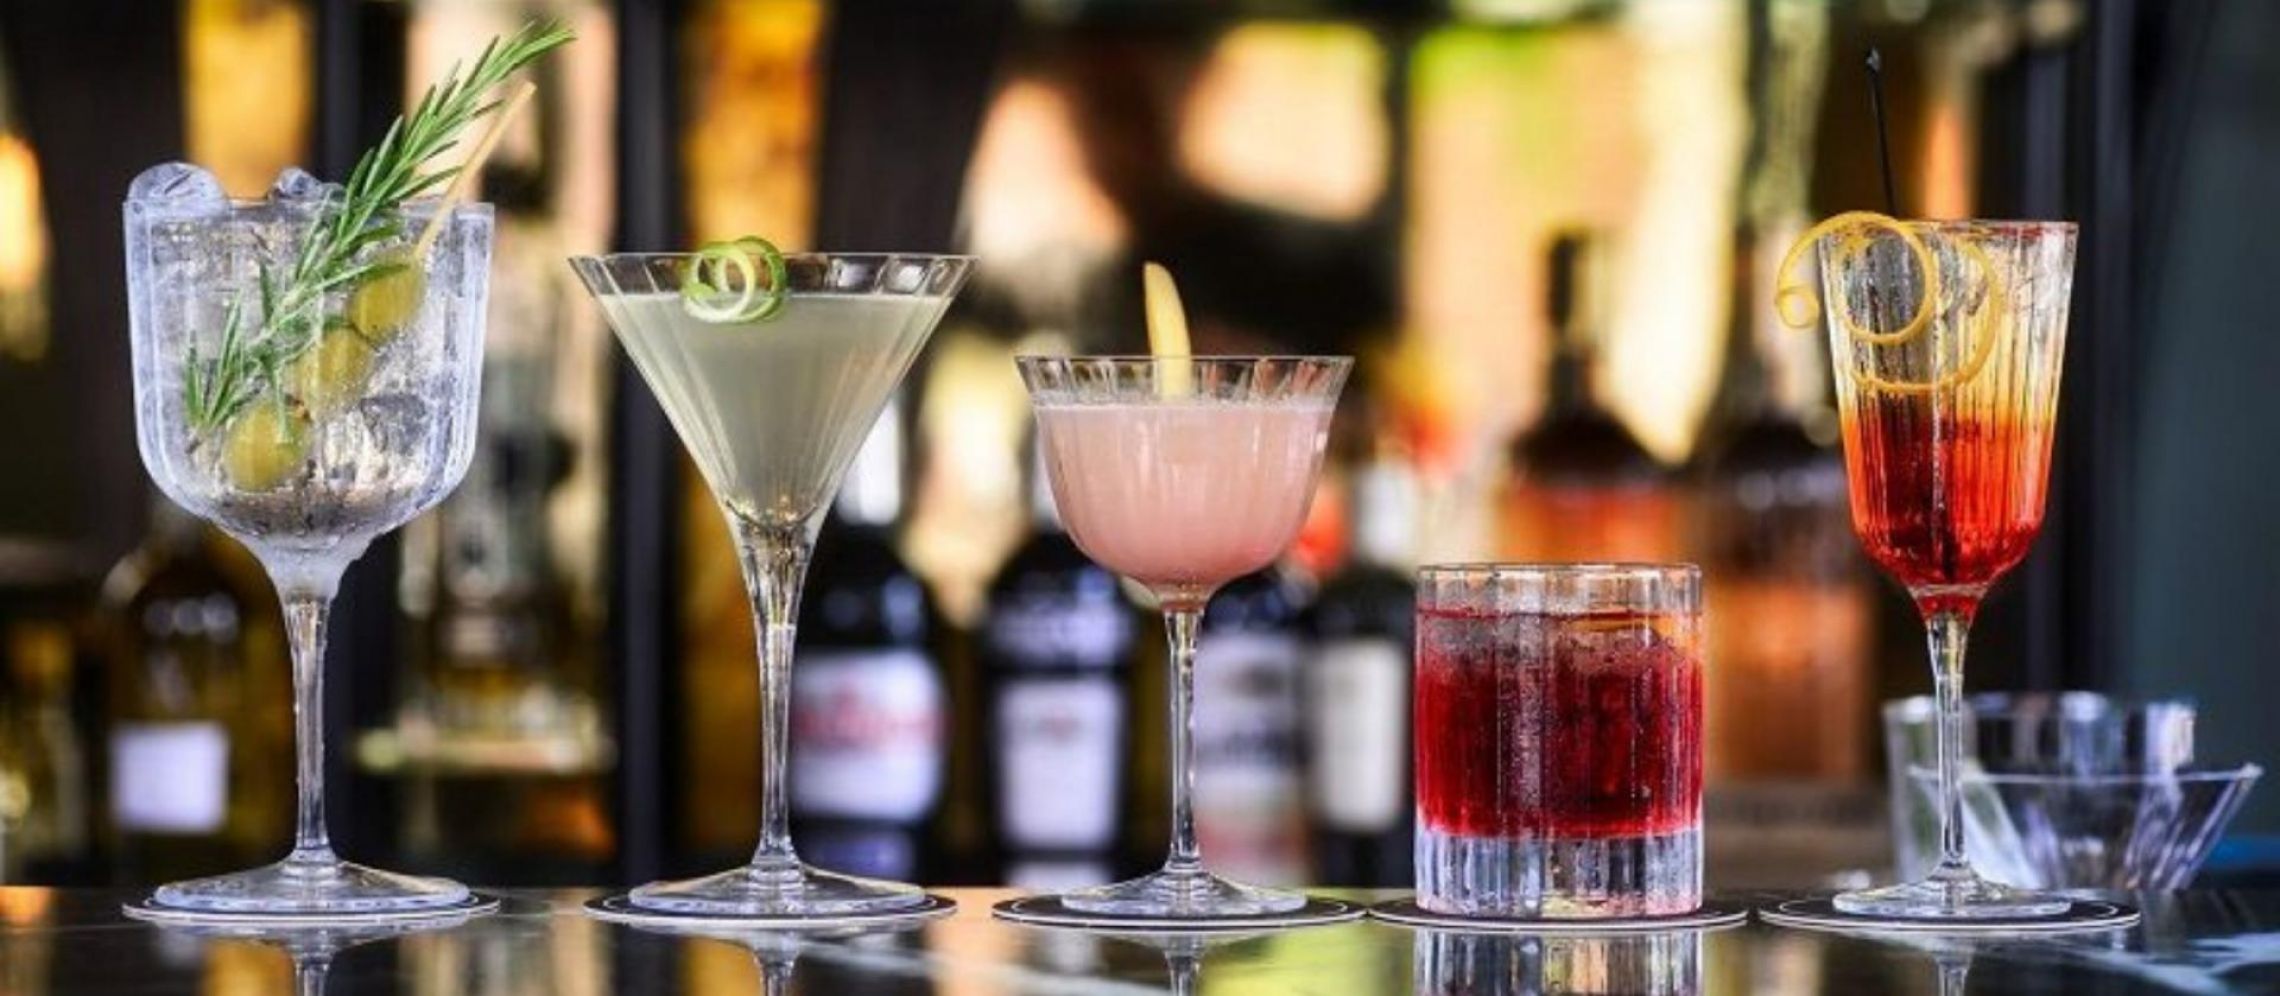 Photo for: Top Hot-Shot Bars To Visit in London in 2022